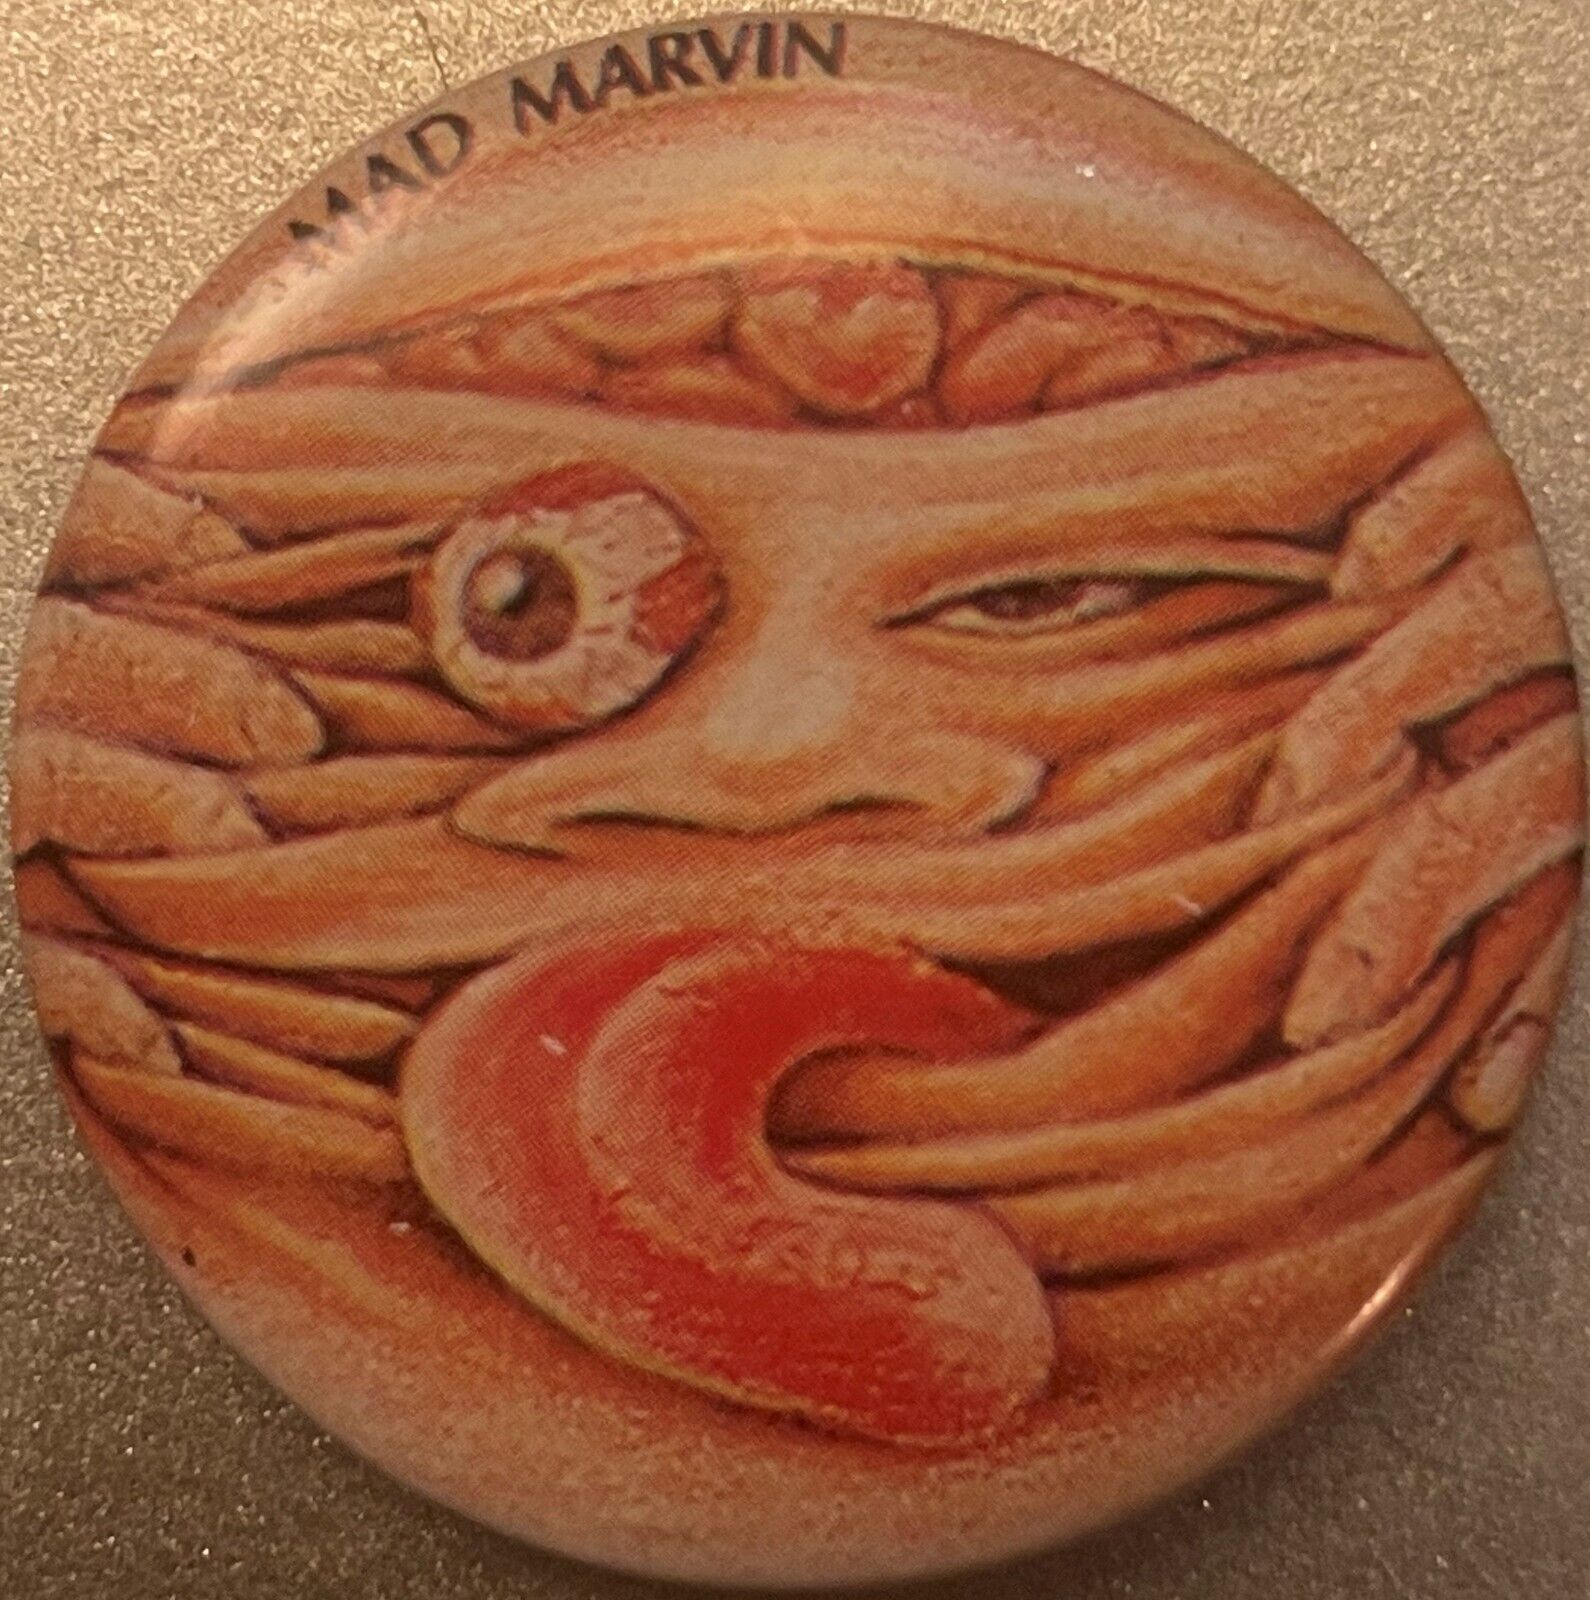 Vintage Mad Marvin Pin Madballs and Garbage Pail Kids Inspired 1980s